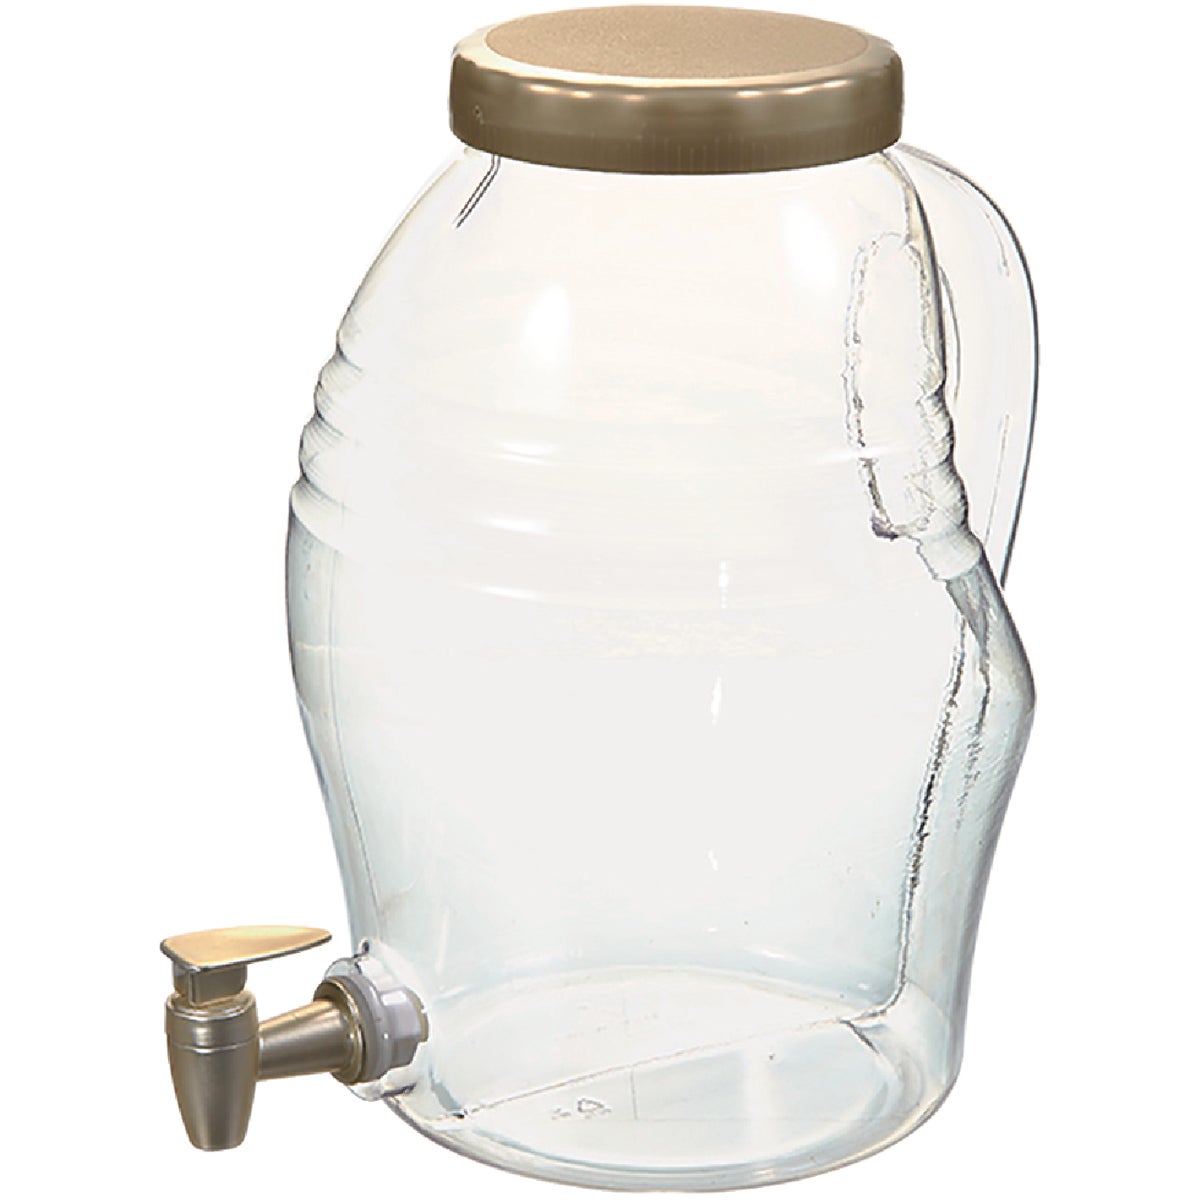 Arrow 1.5 Gal. Elite Beverage Container with Spout